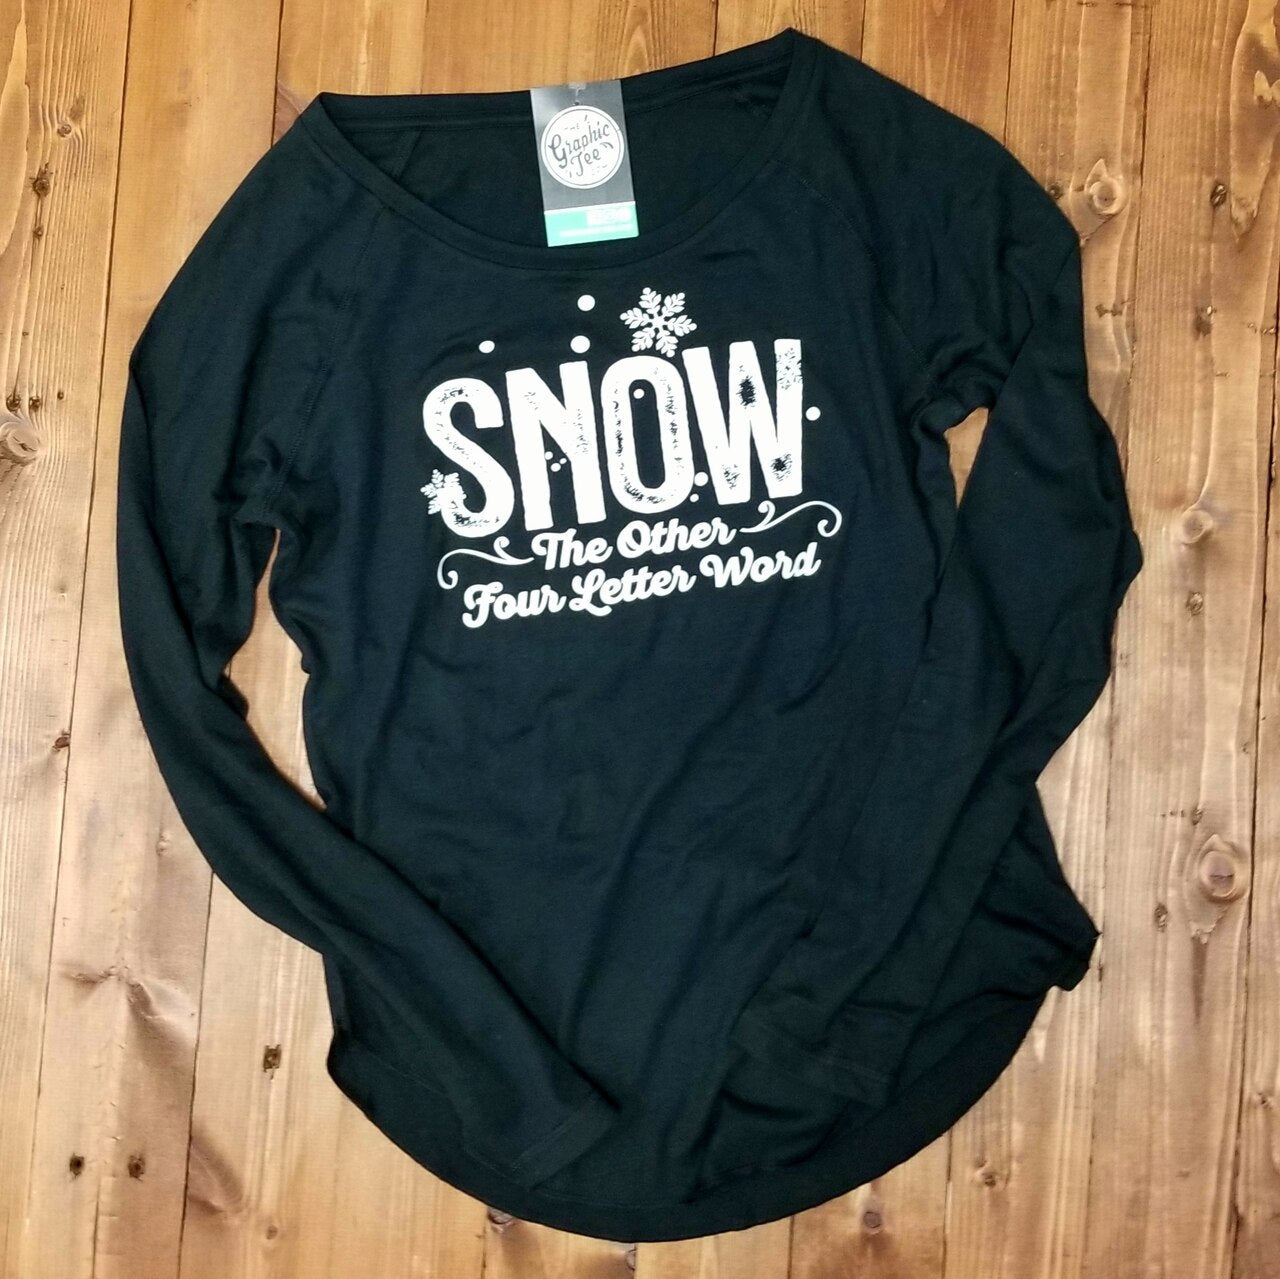 Snow The Other Four Letter Word - Ladies Long Sleeve Raglan - The Graphic Tee